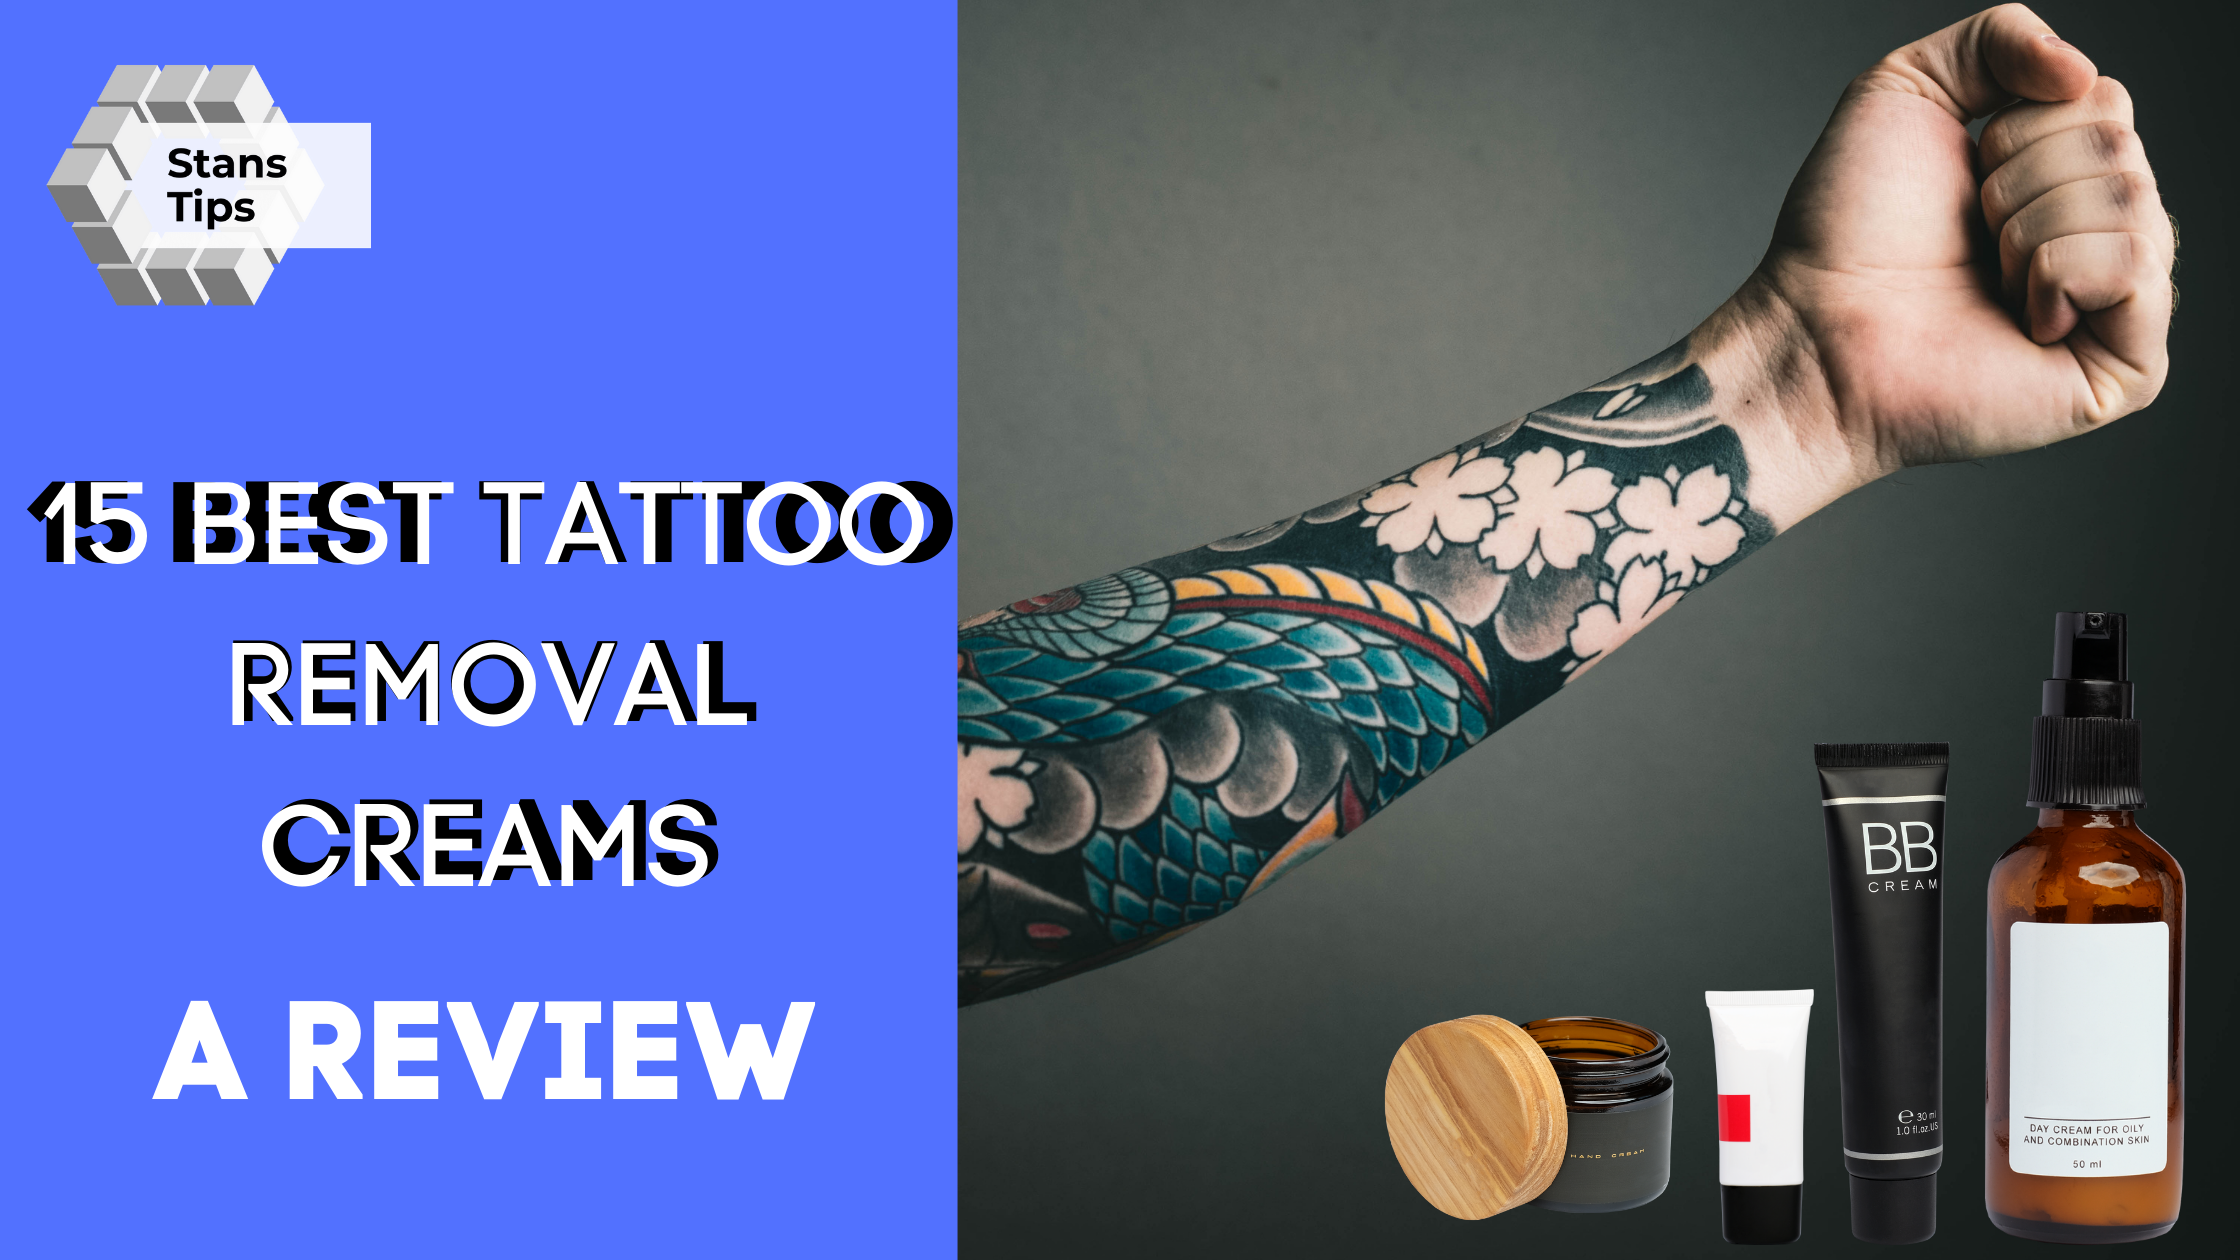 9. Tattoo Removal Cream Reviews: Which Ones Actually Work? - wide 6